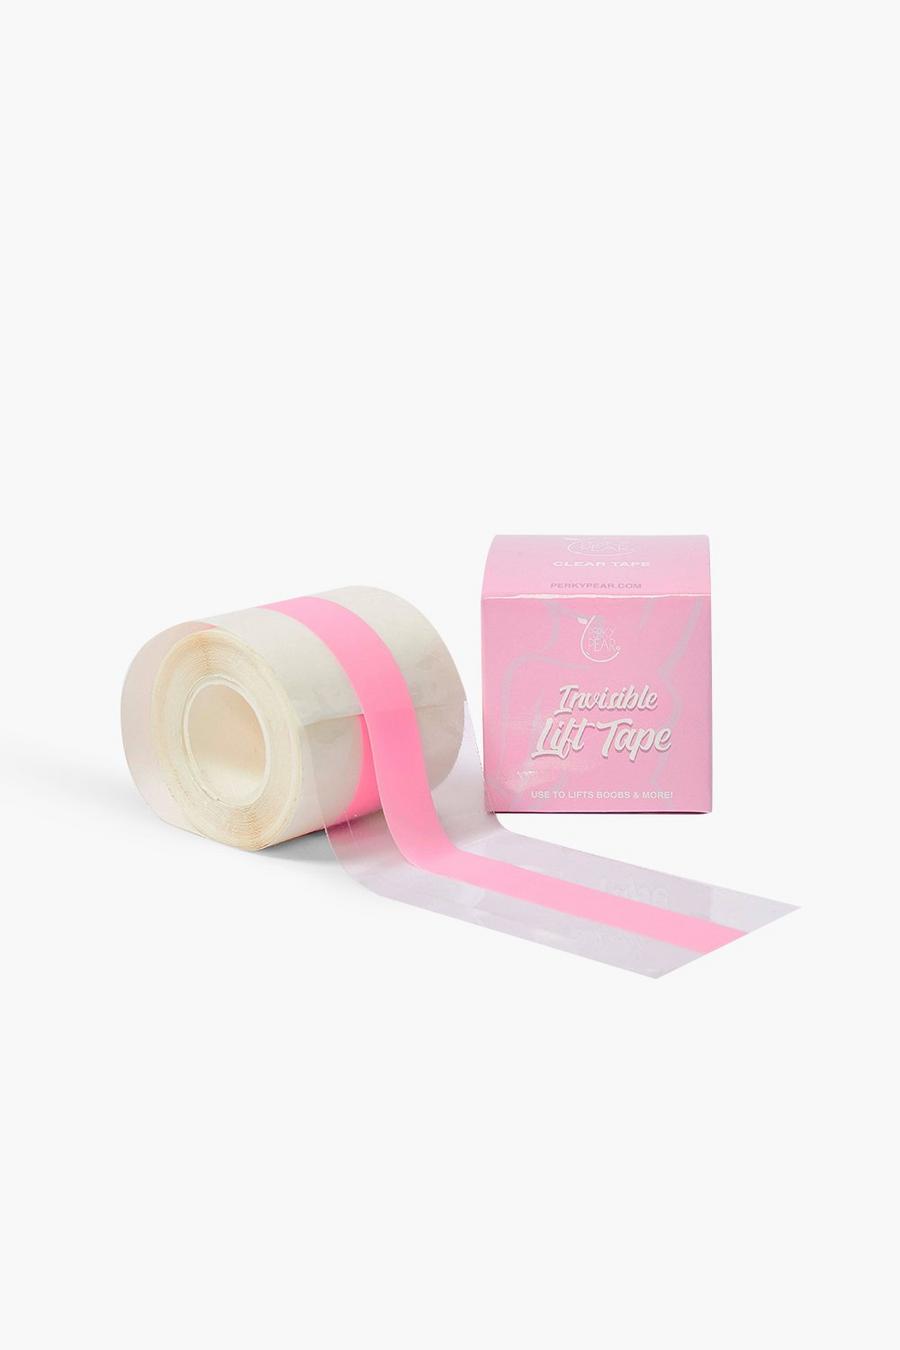 Perky Pear unsichtbares Lift-Tape, Pink